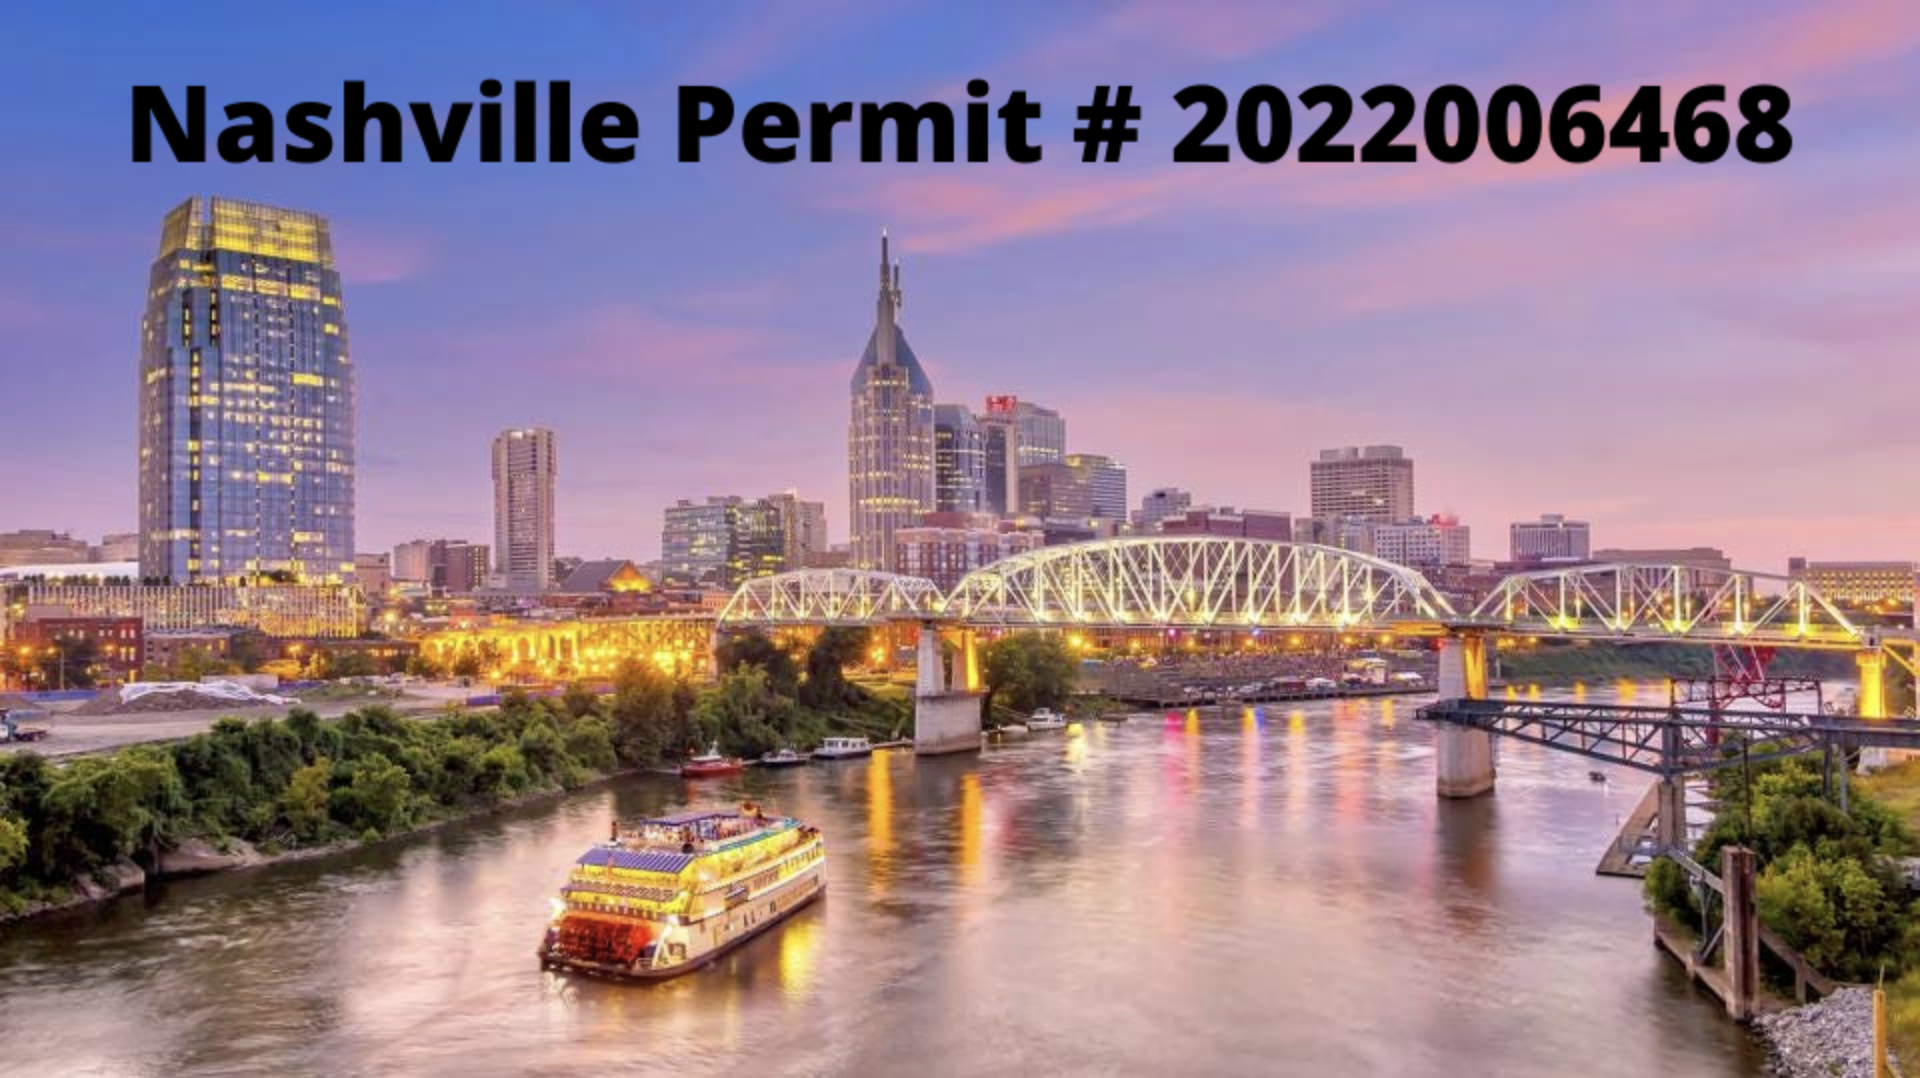 Nashville Permit for 1st Unit: issued in 2022 followed by:2022006468